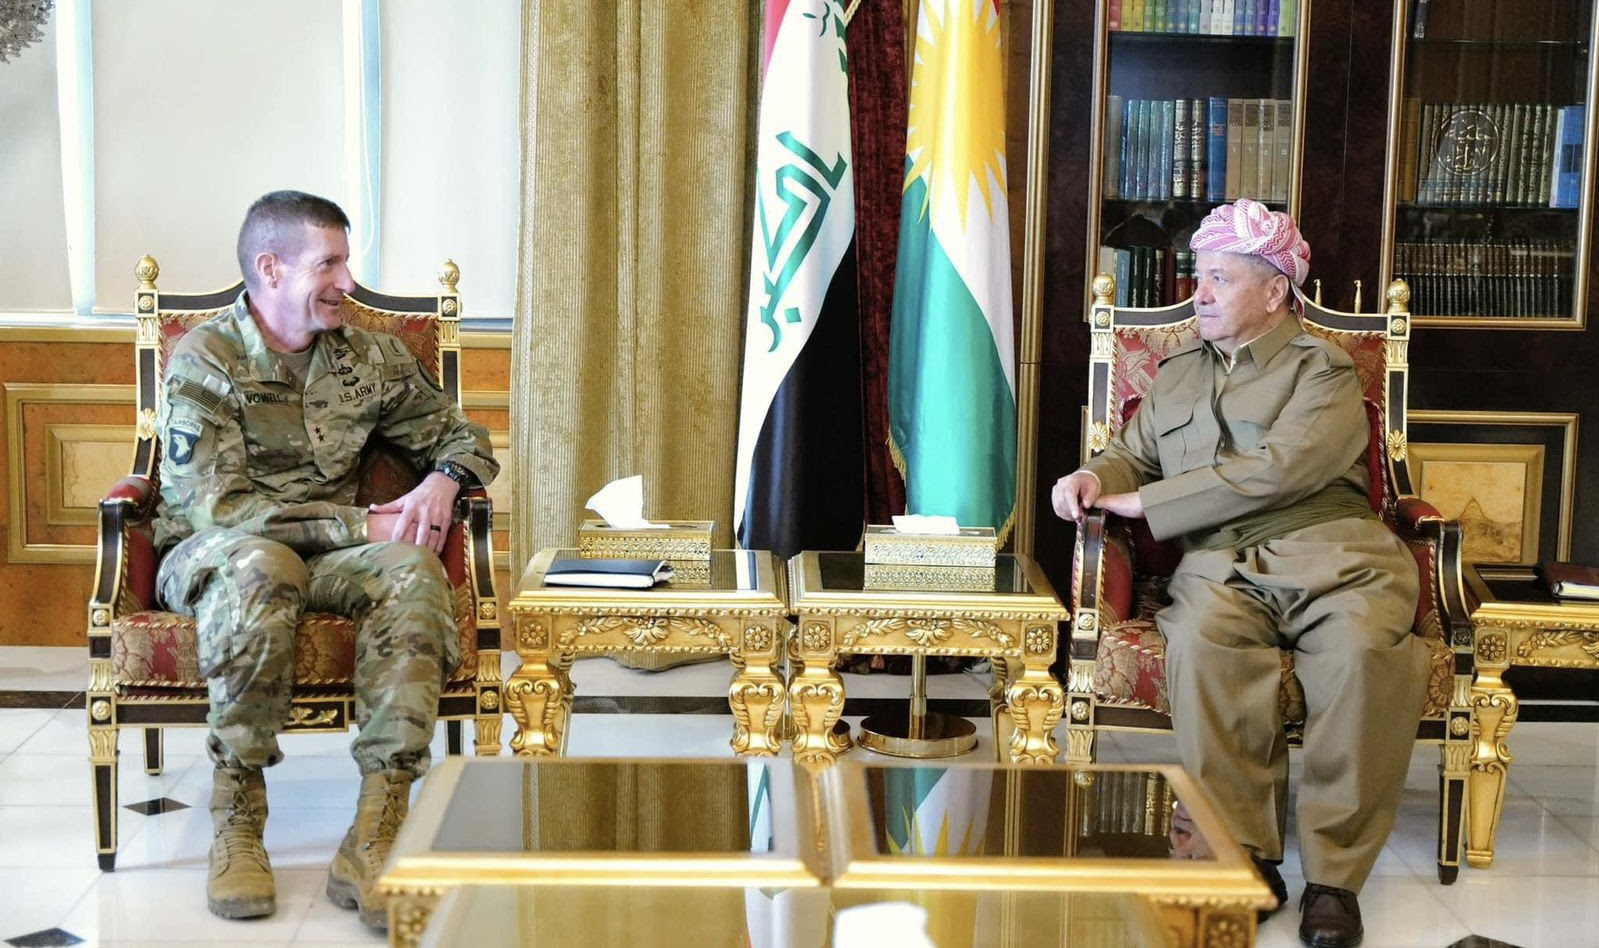 Masoud Barzani and General "Foul" confirm the continued work of the coalition forces in Iraq and Syria